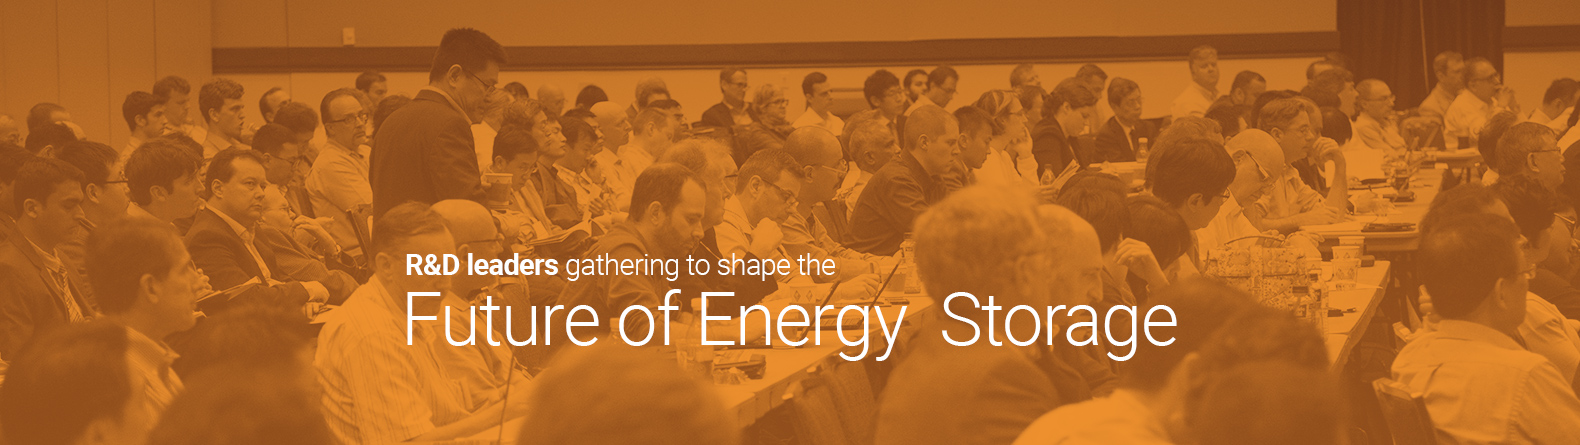 R&D leaders gathering to shape the Future of Energy 